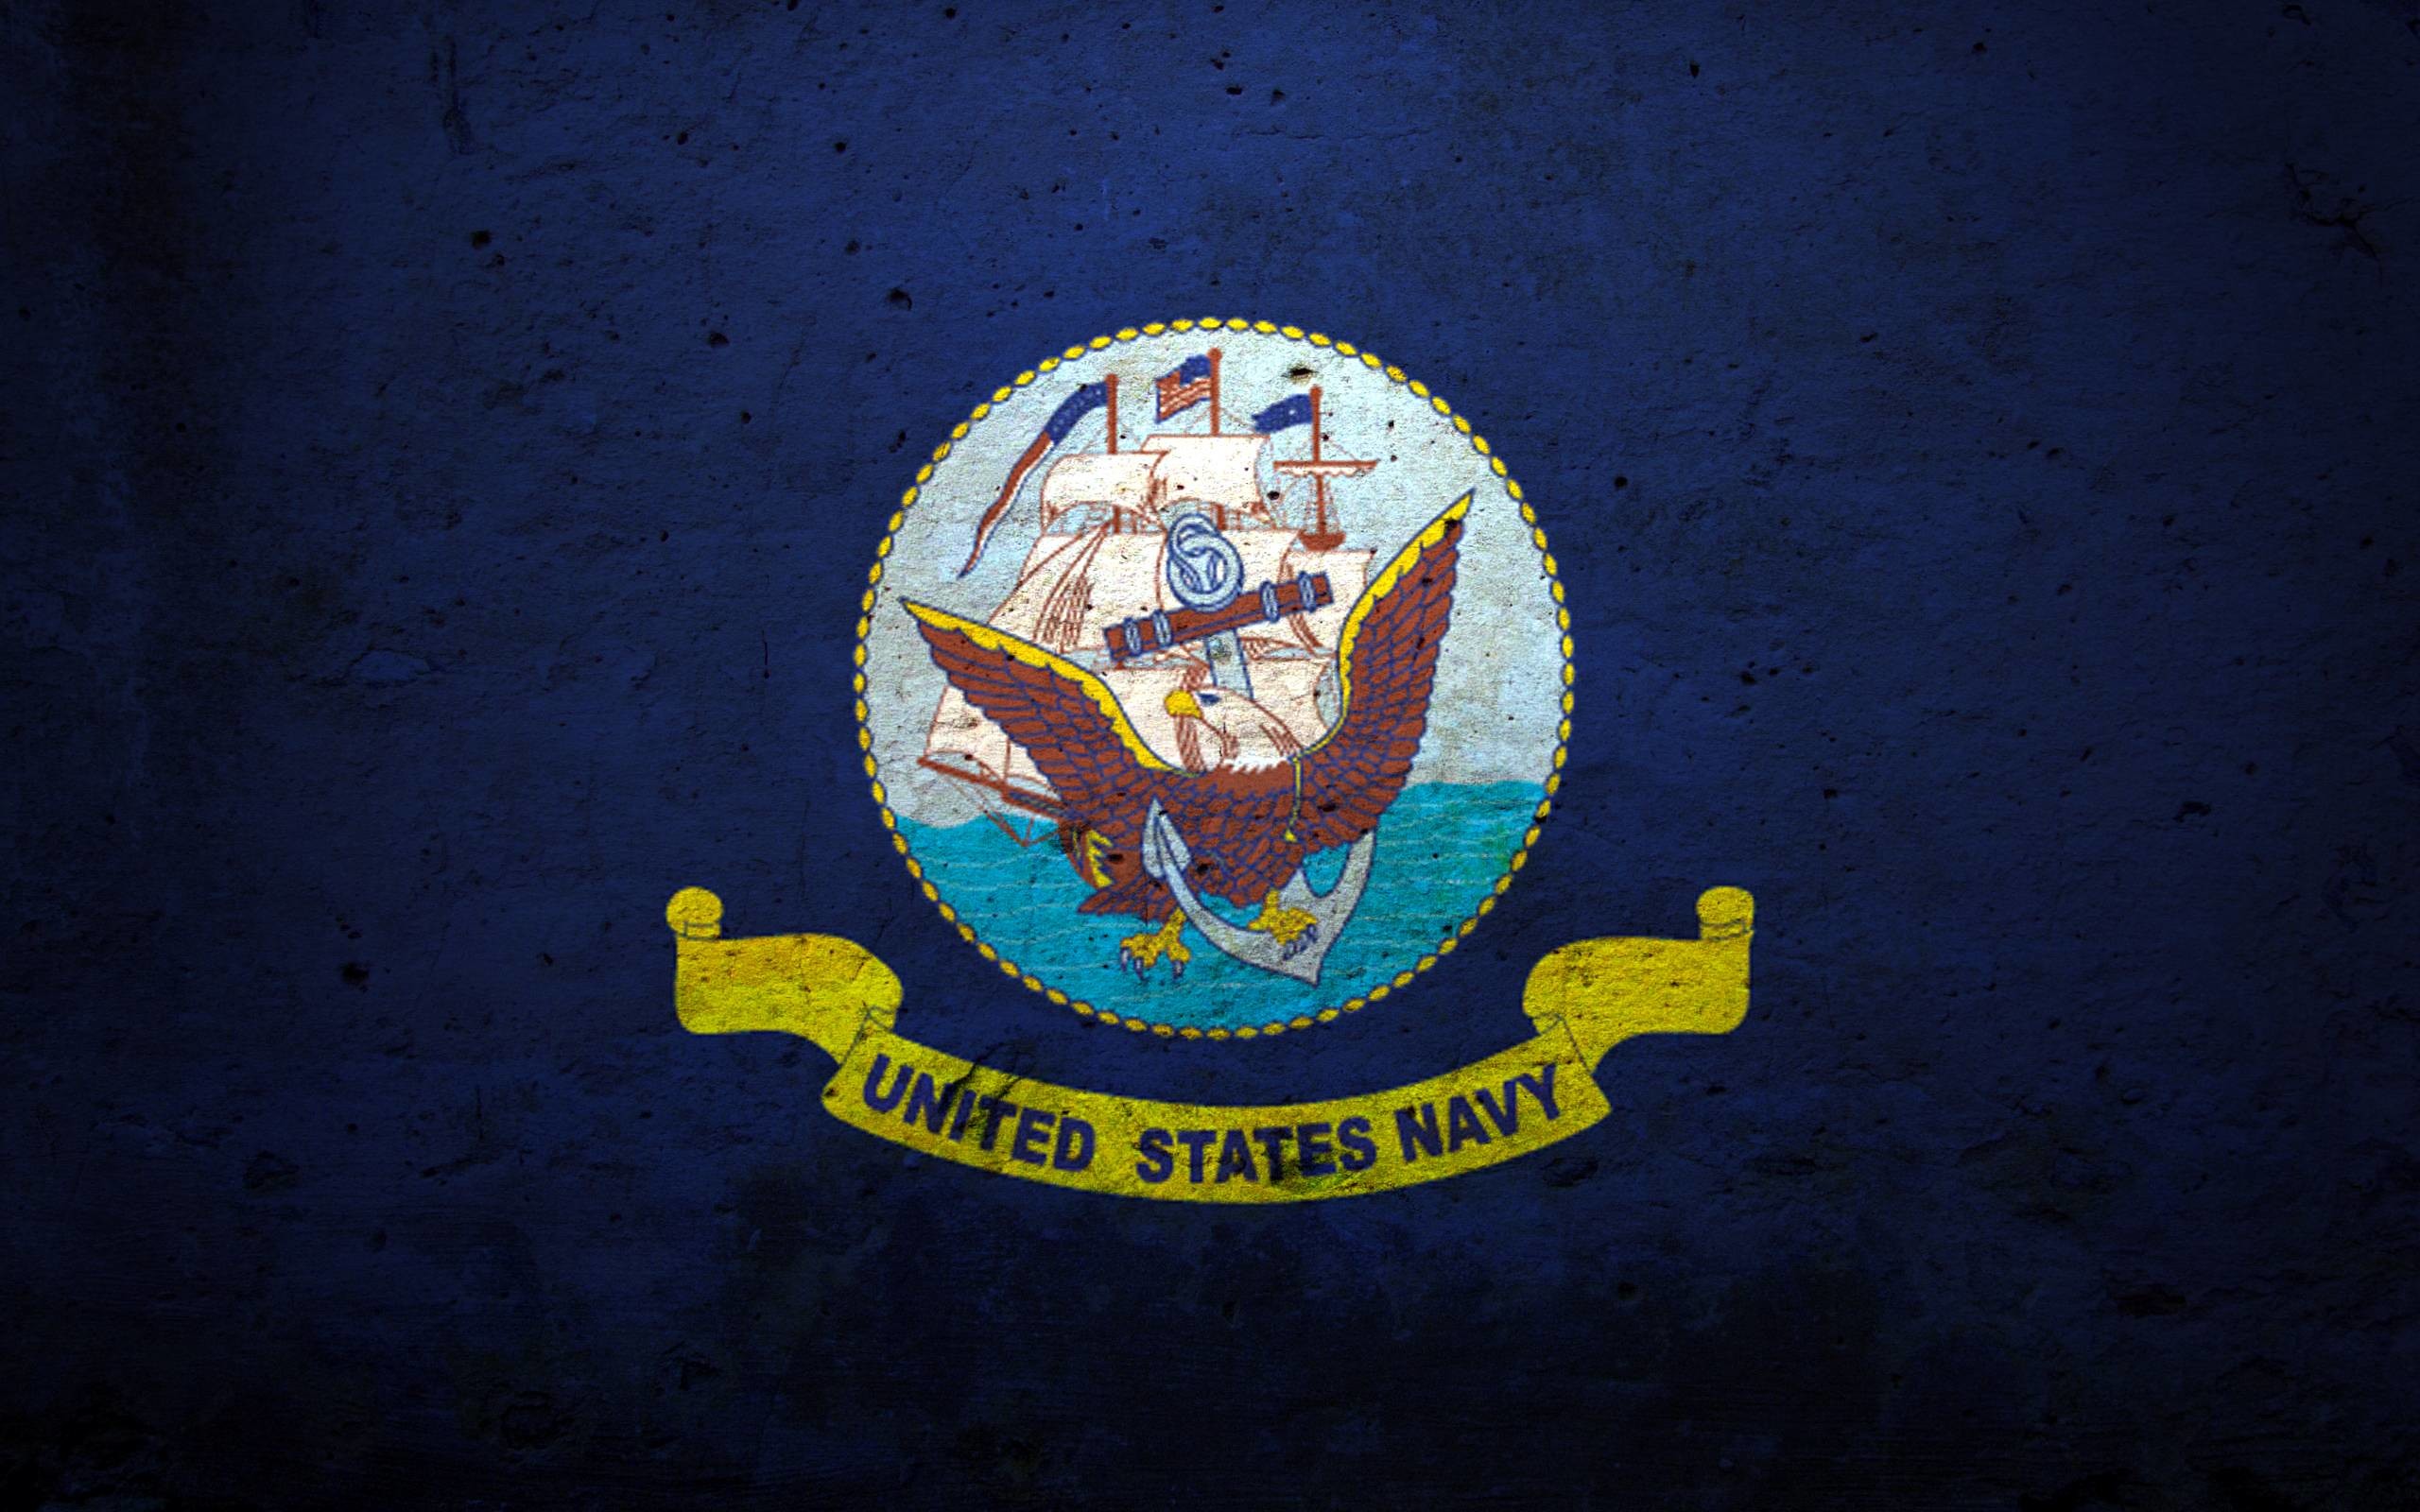 Us navy backgrounds 25601600 High Definition Wallpaper